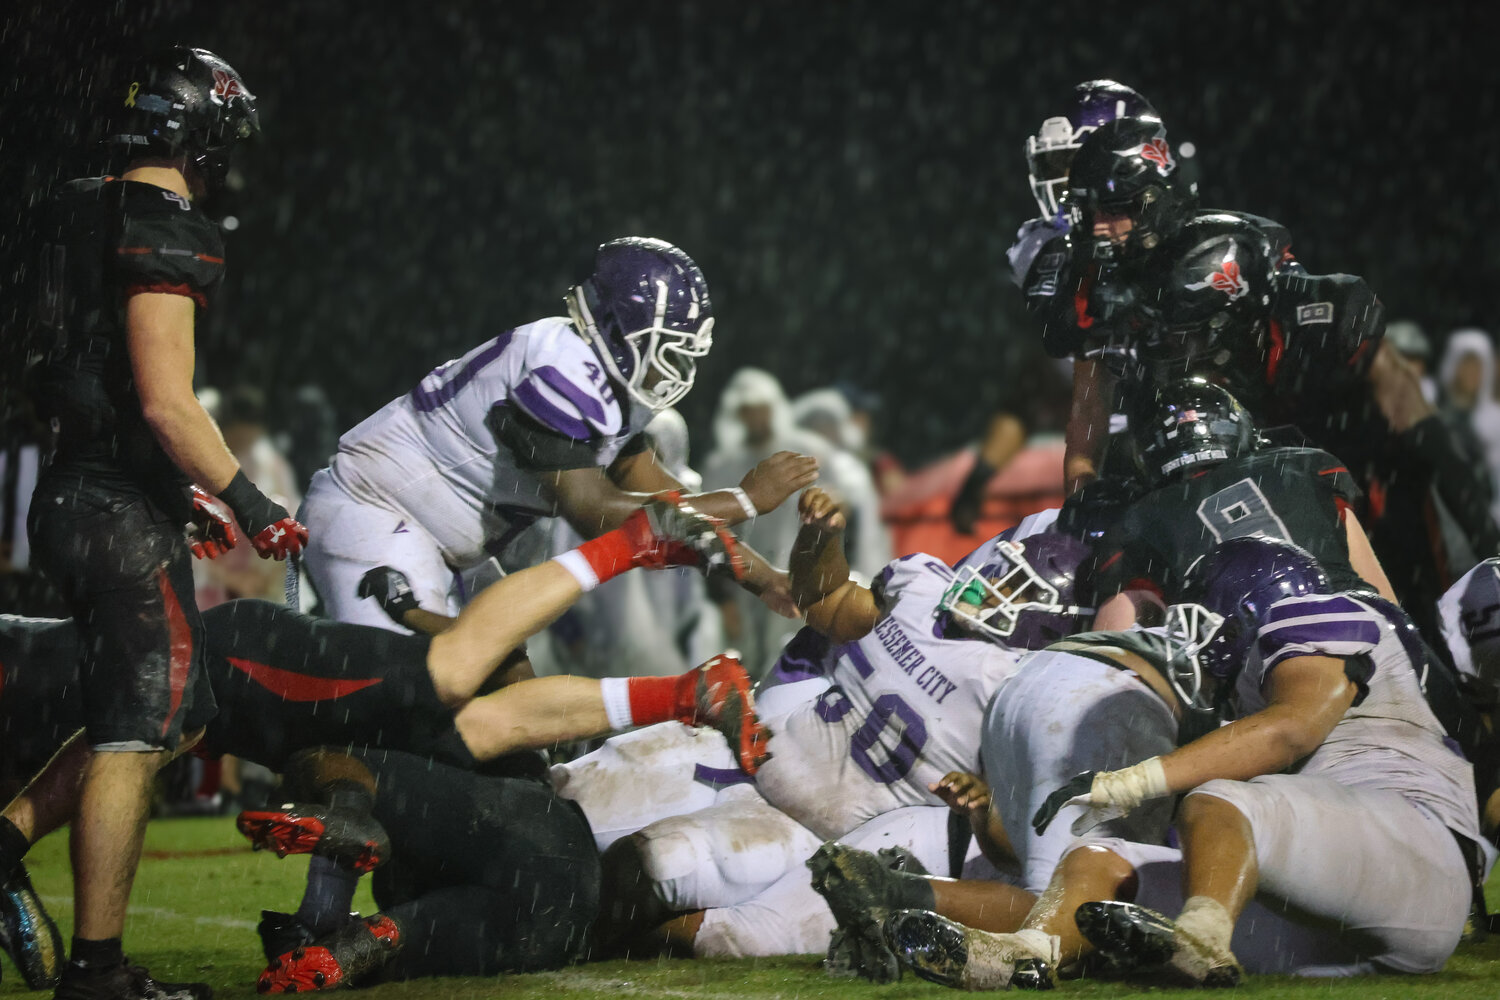 A group of Toros and Purple Tigers fight to gain control of the ball amidst the slippery conditions through Friday’s rain during the Class 6A State Playoff game between Spanish Fort and Bessemer City. The Toros earned a 28-0 win and improved to 11-0 at home in the first round.